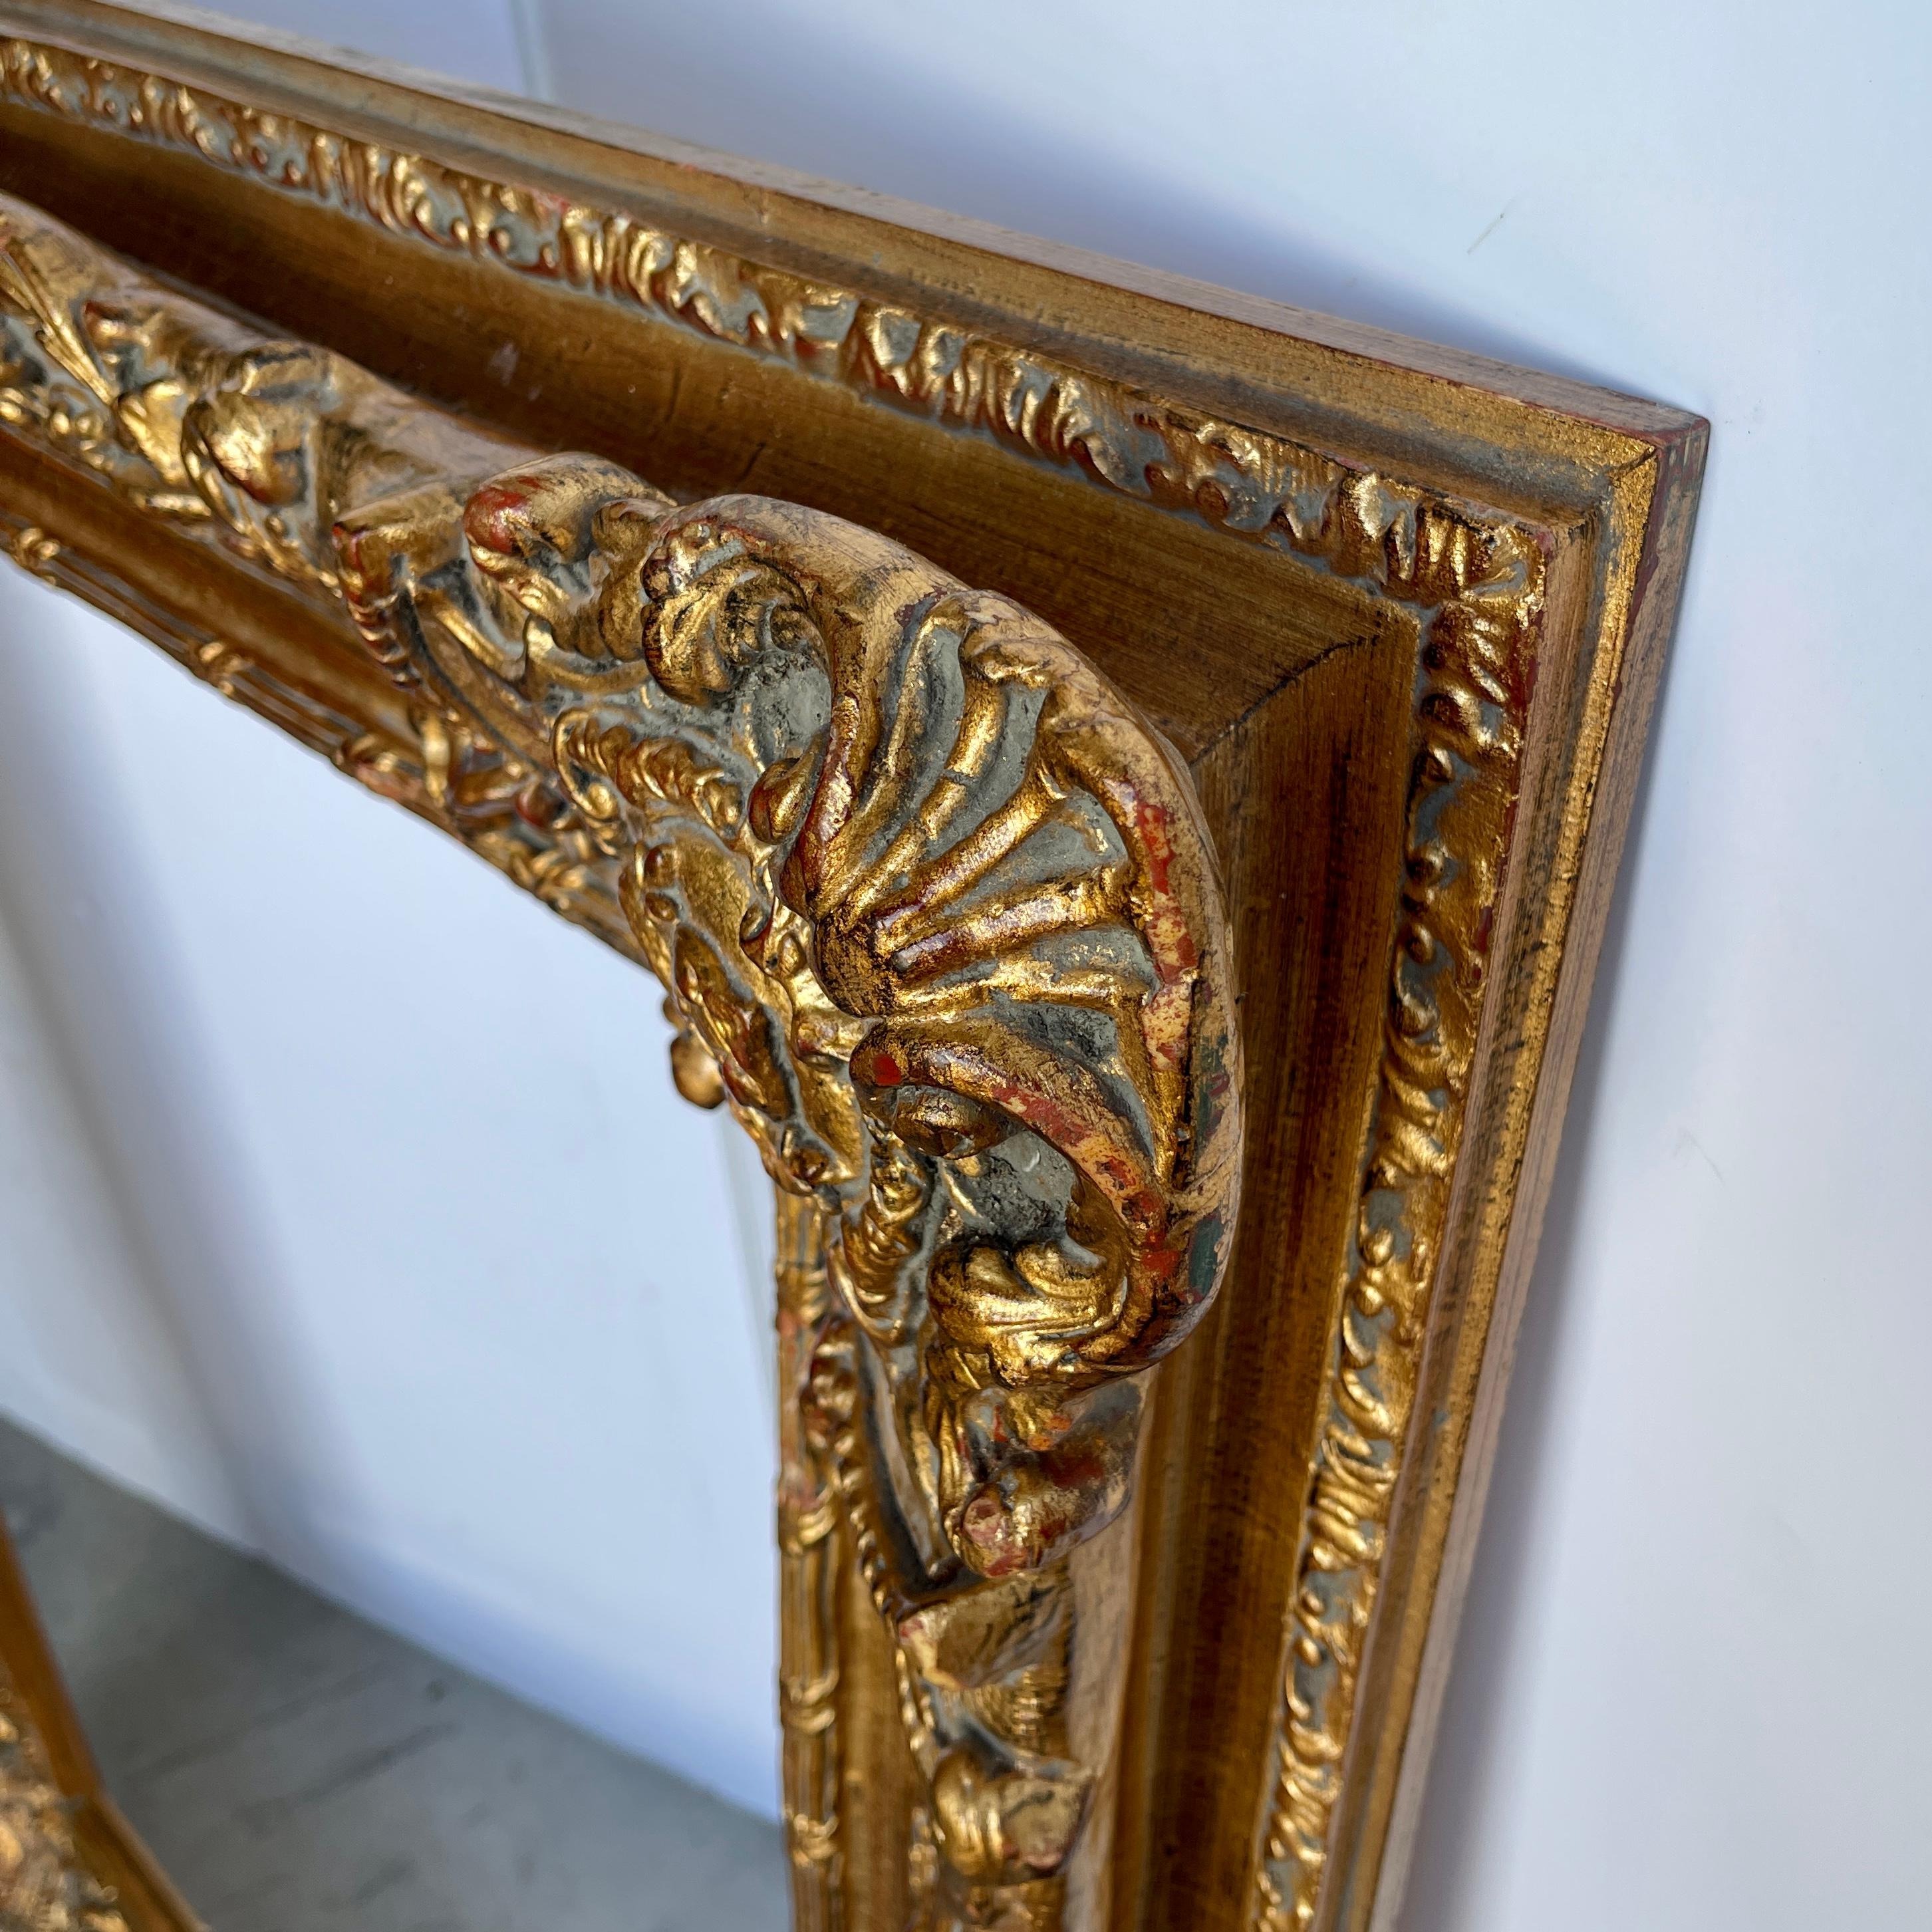 20th Century Large Ornate Carved Gilt Wood Frame, French Rococo Style  For Sale 5